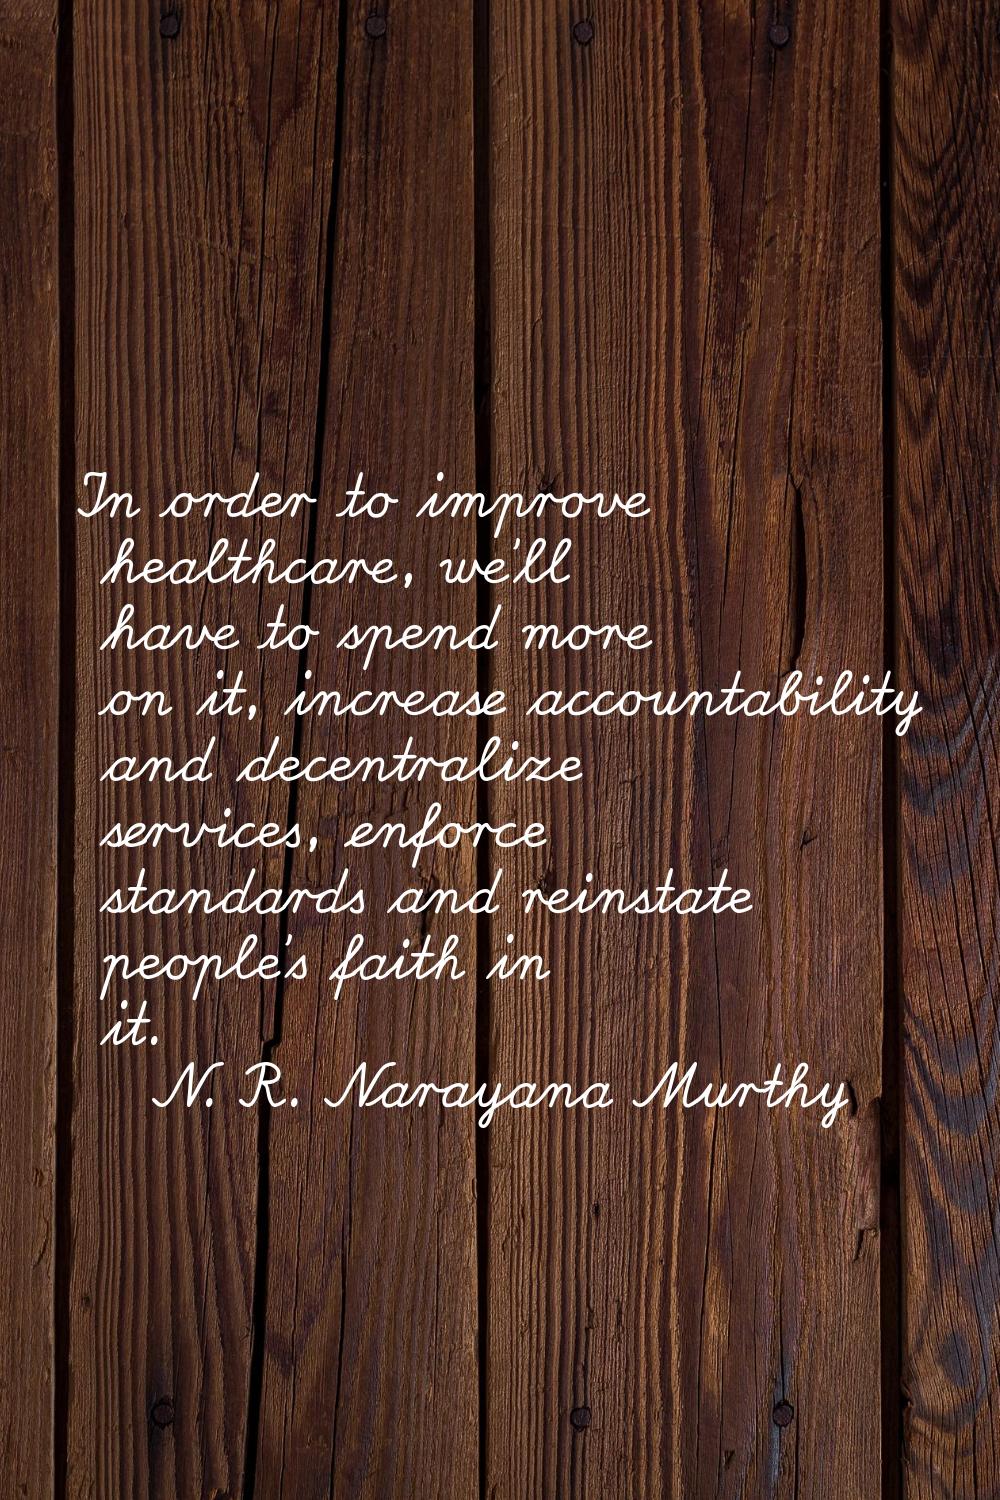 In order to improve healthcare, we'll have to spend more on it, increase accountability and decentr